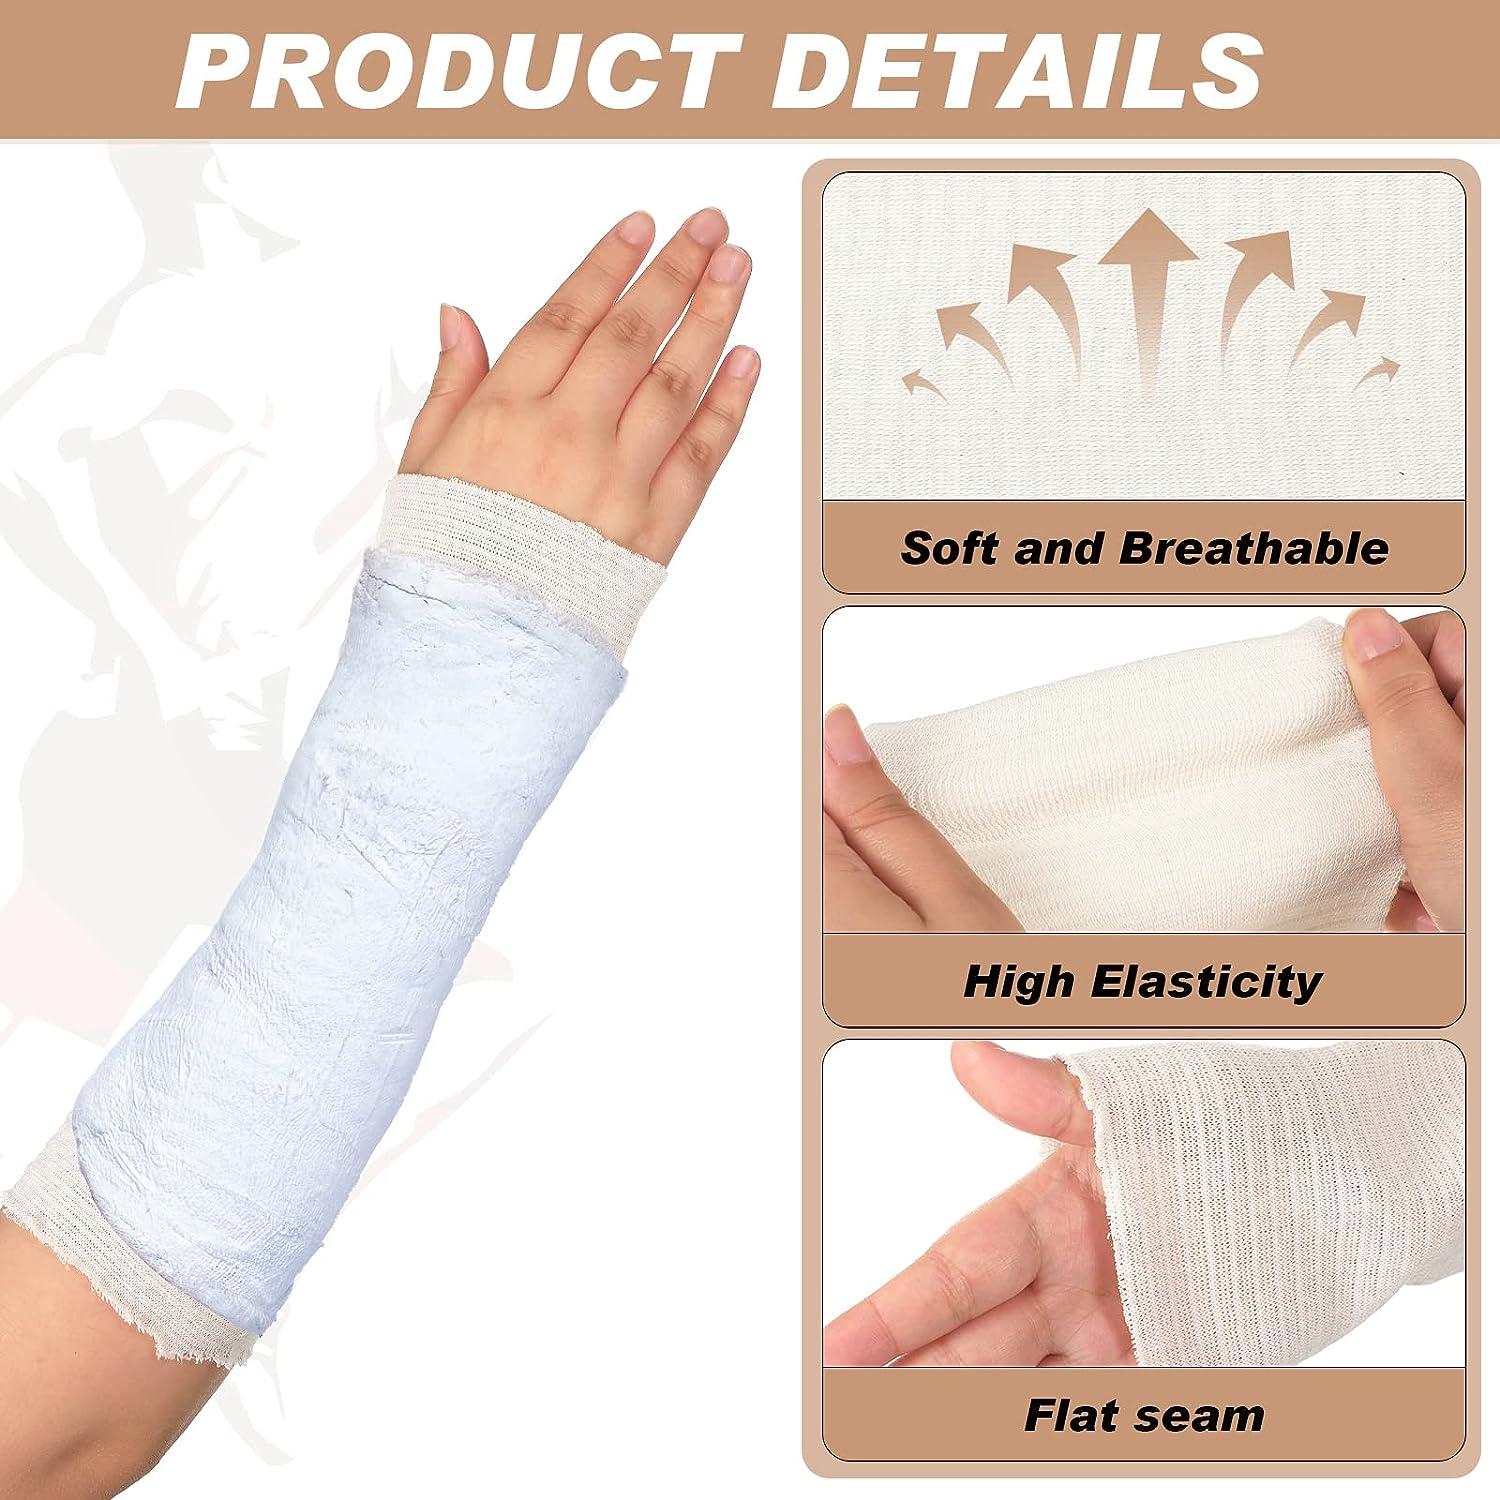 Cast Comfort: Get help & relief for your itchy, smelly cast